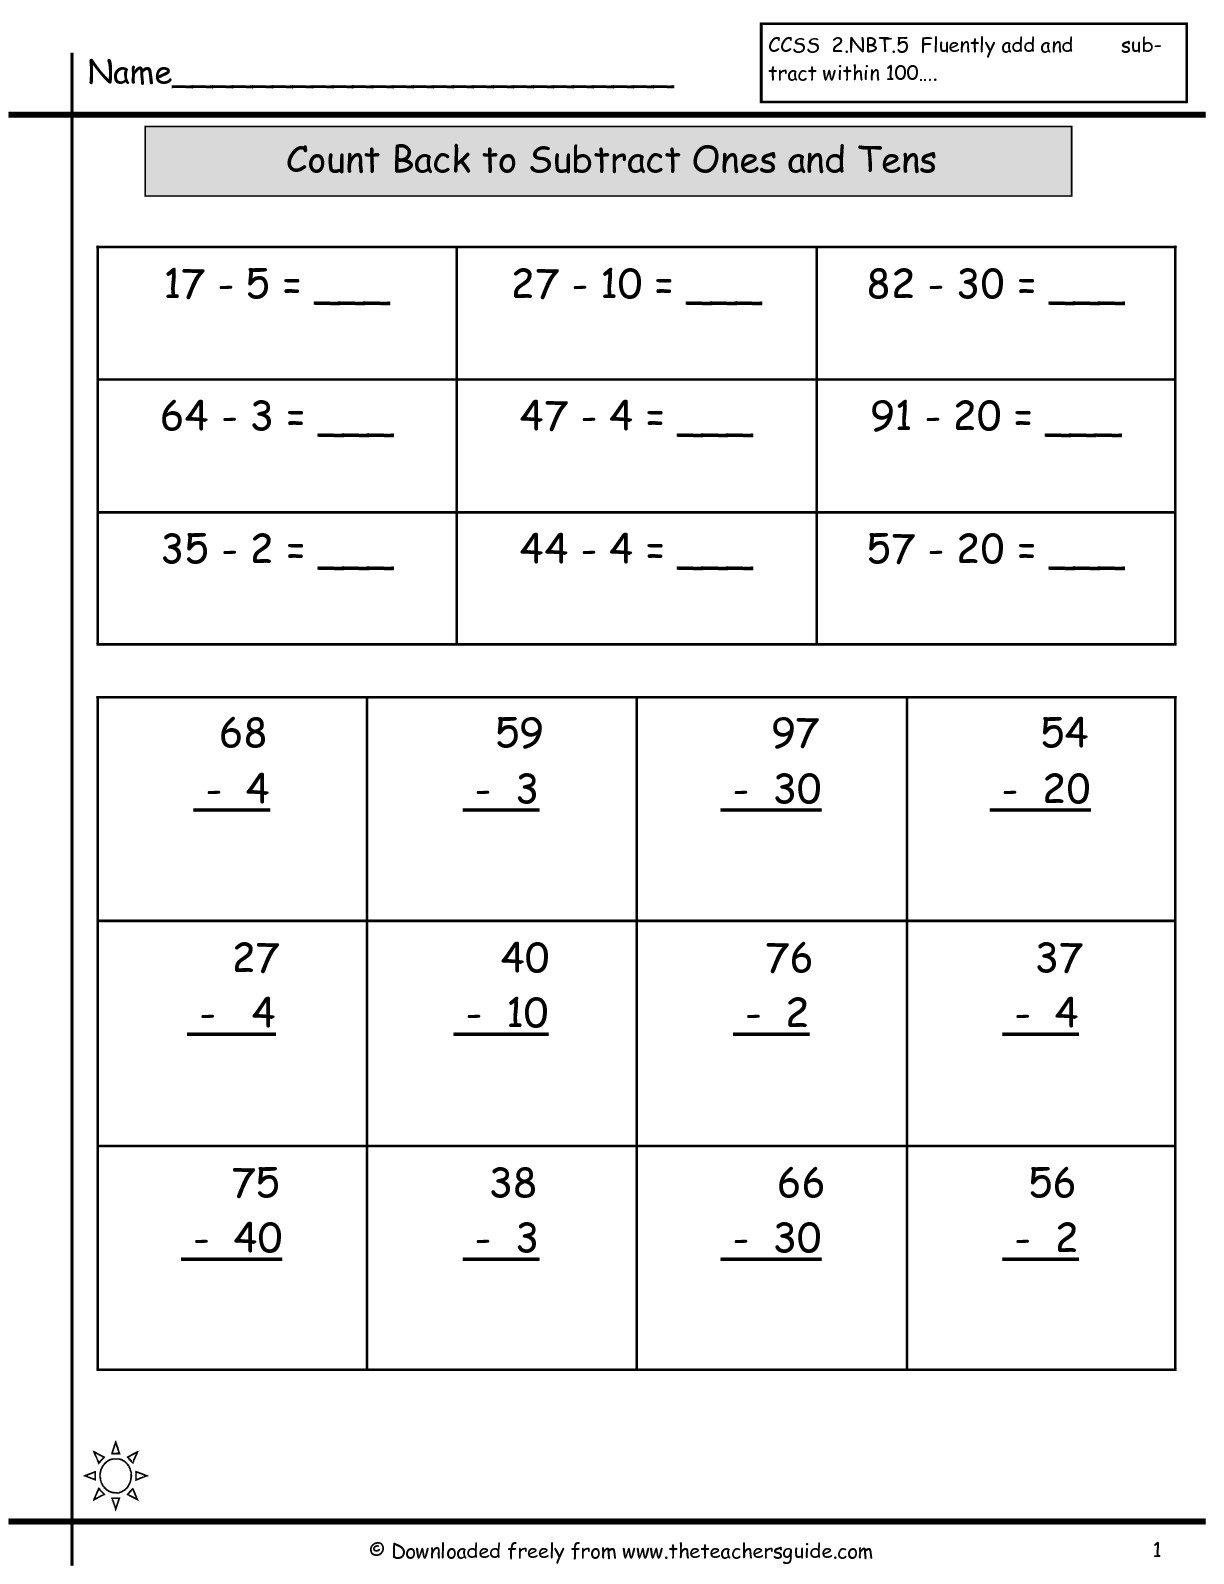 Subtracting Tens and Ones Worksheets Image